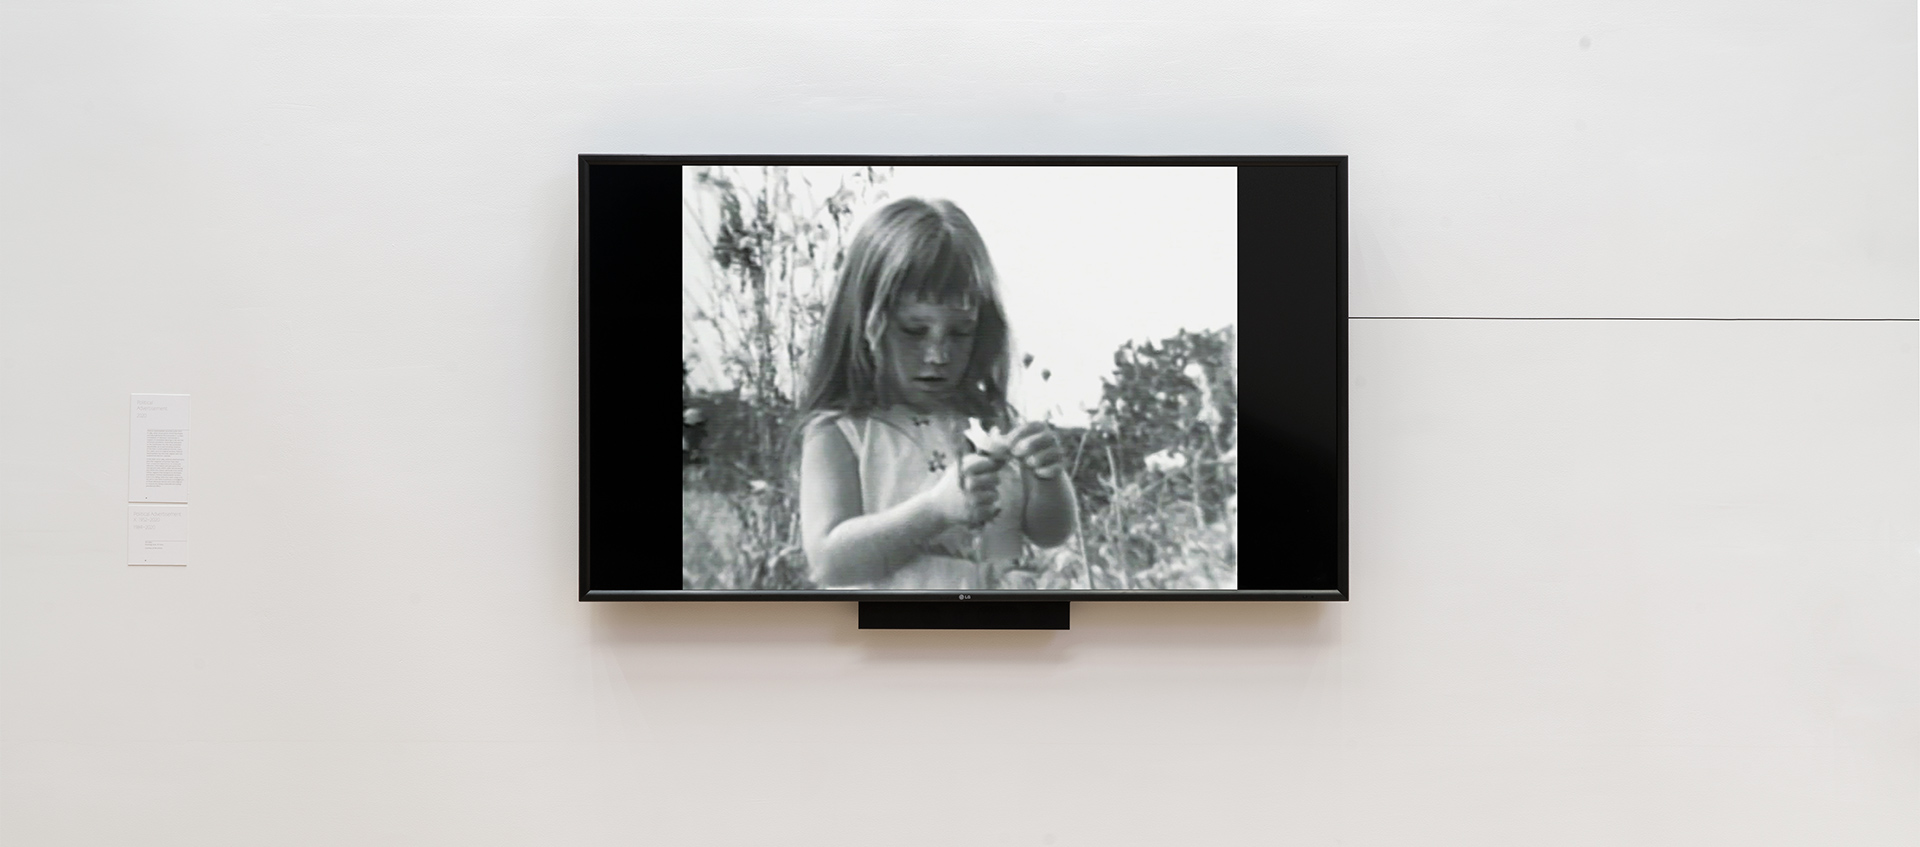 A tv mounted to a gallery wall displays a black and white image of a young girl holding a flower.